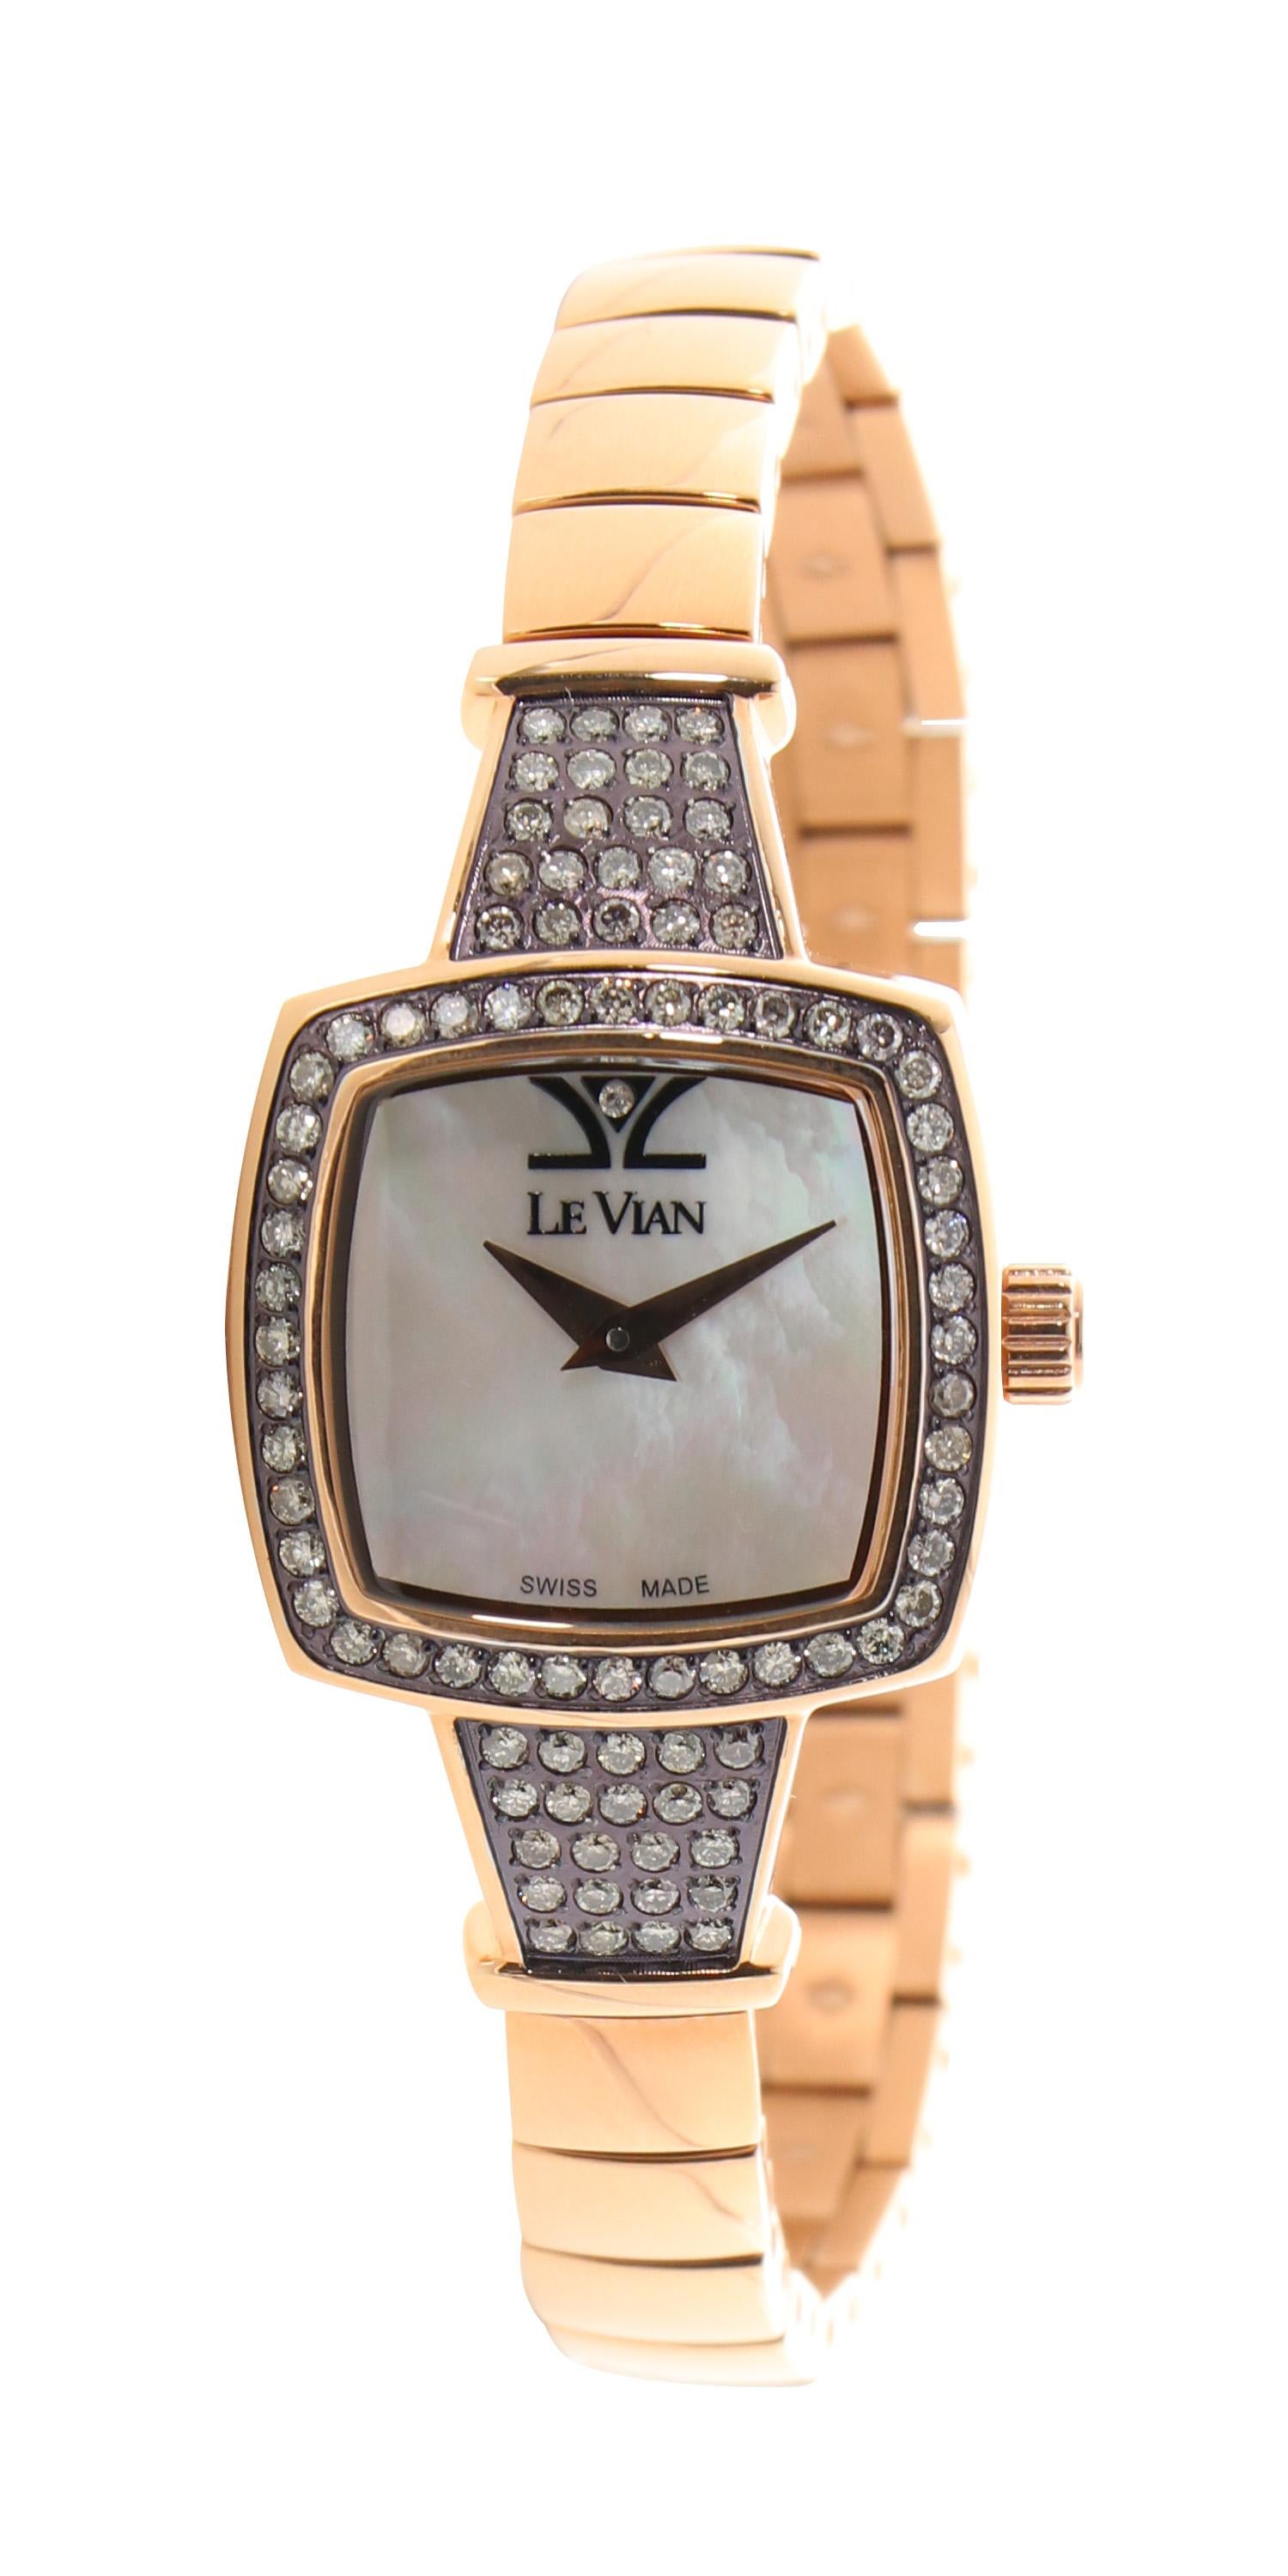 Le Vian 24 mm Square Ladies' Wristwatch featuring 1.29cttw of Chocolate and Vanilla Diamondsin Strawberry Goldplated Stainless Steel.
